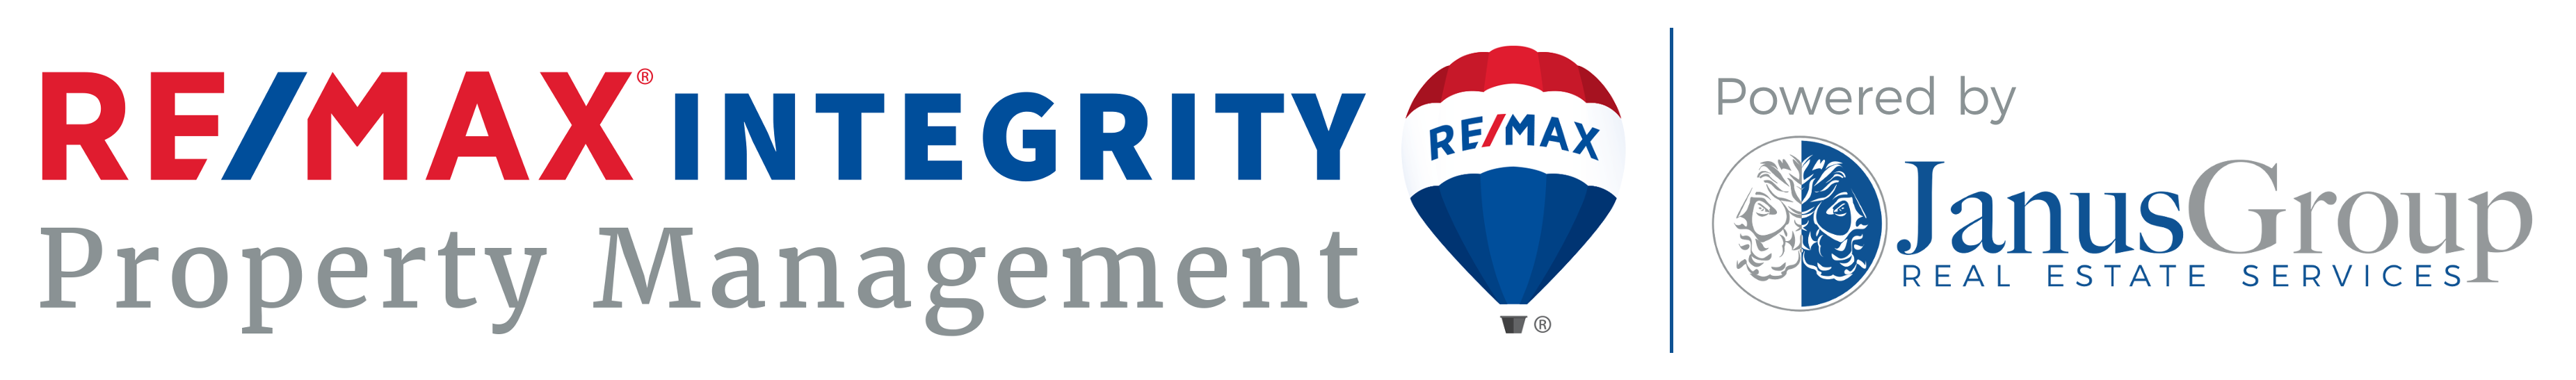 RE/MAX Integrity Property Management